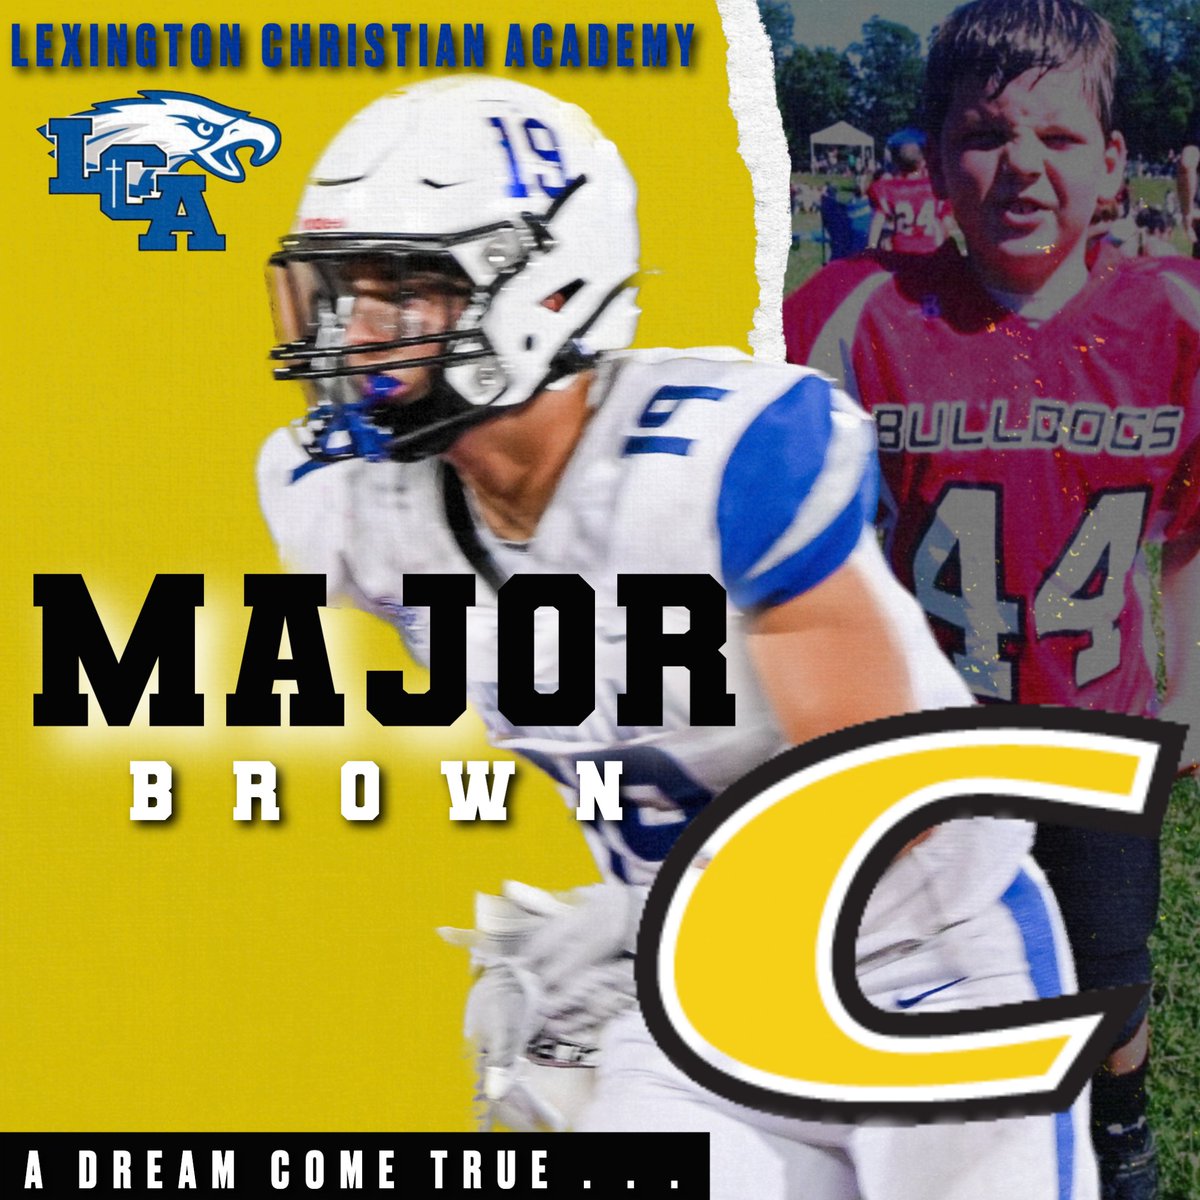 #DREAMCOMETRUE as senior Major Brown will continue his playing career at Centre College! #WEARELCA